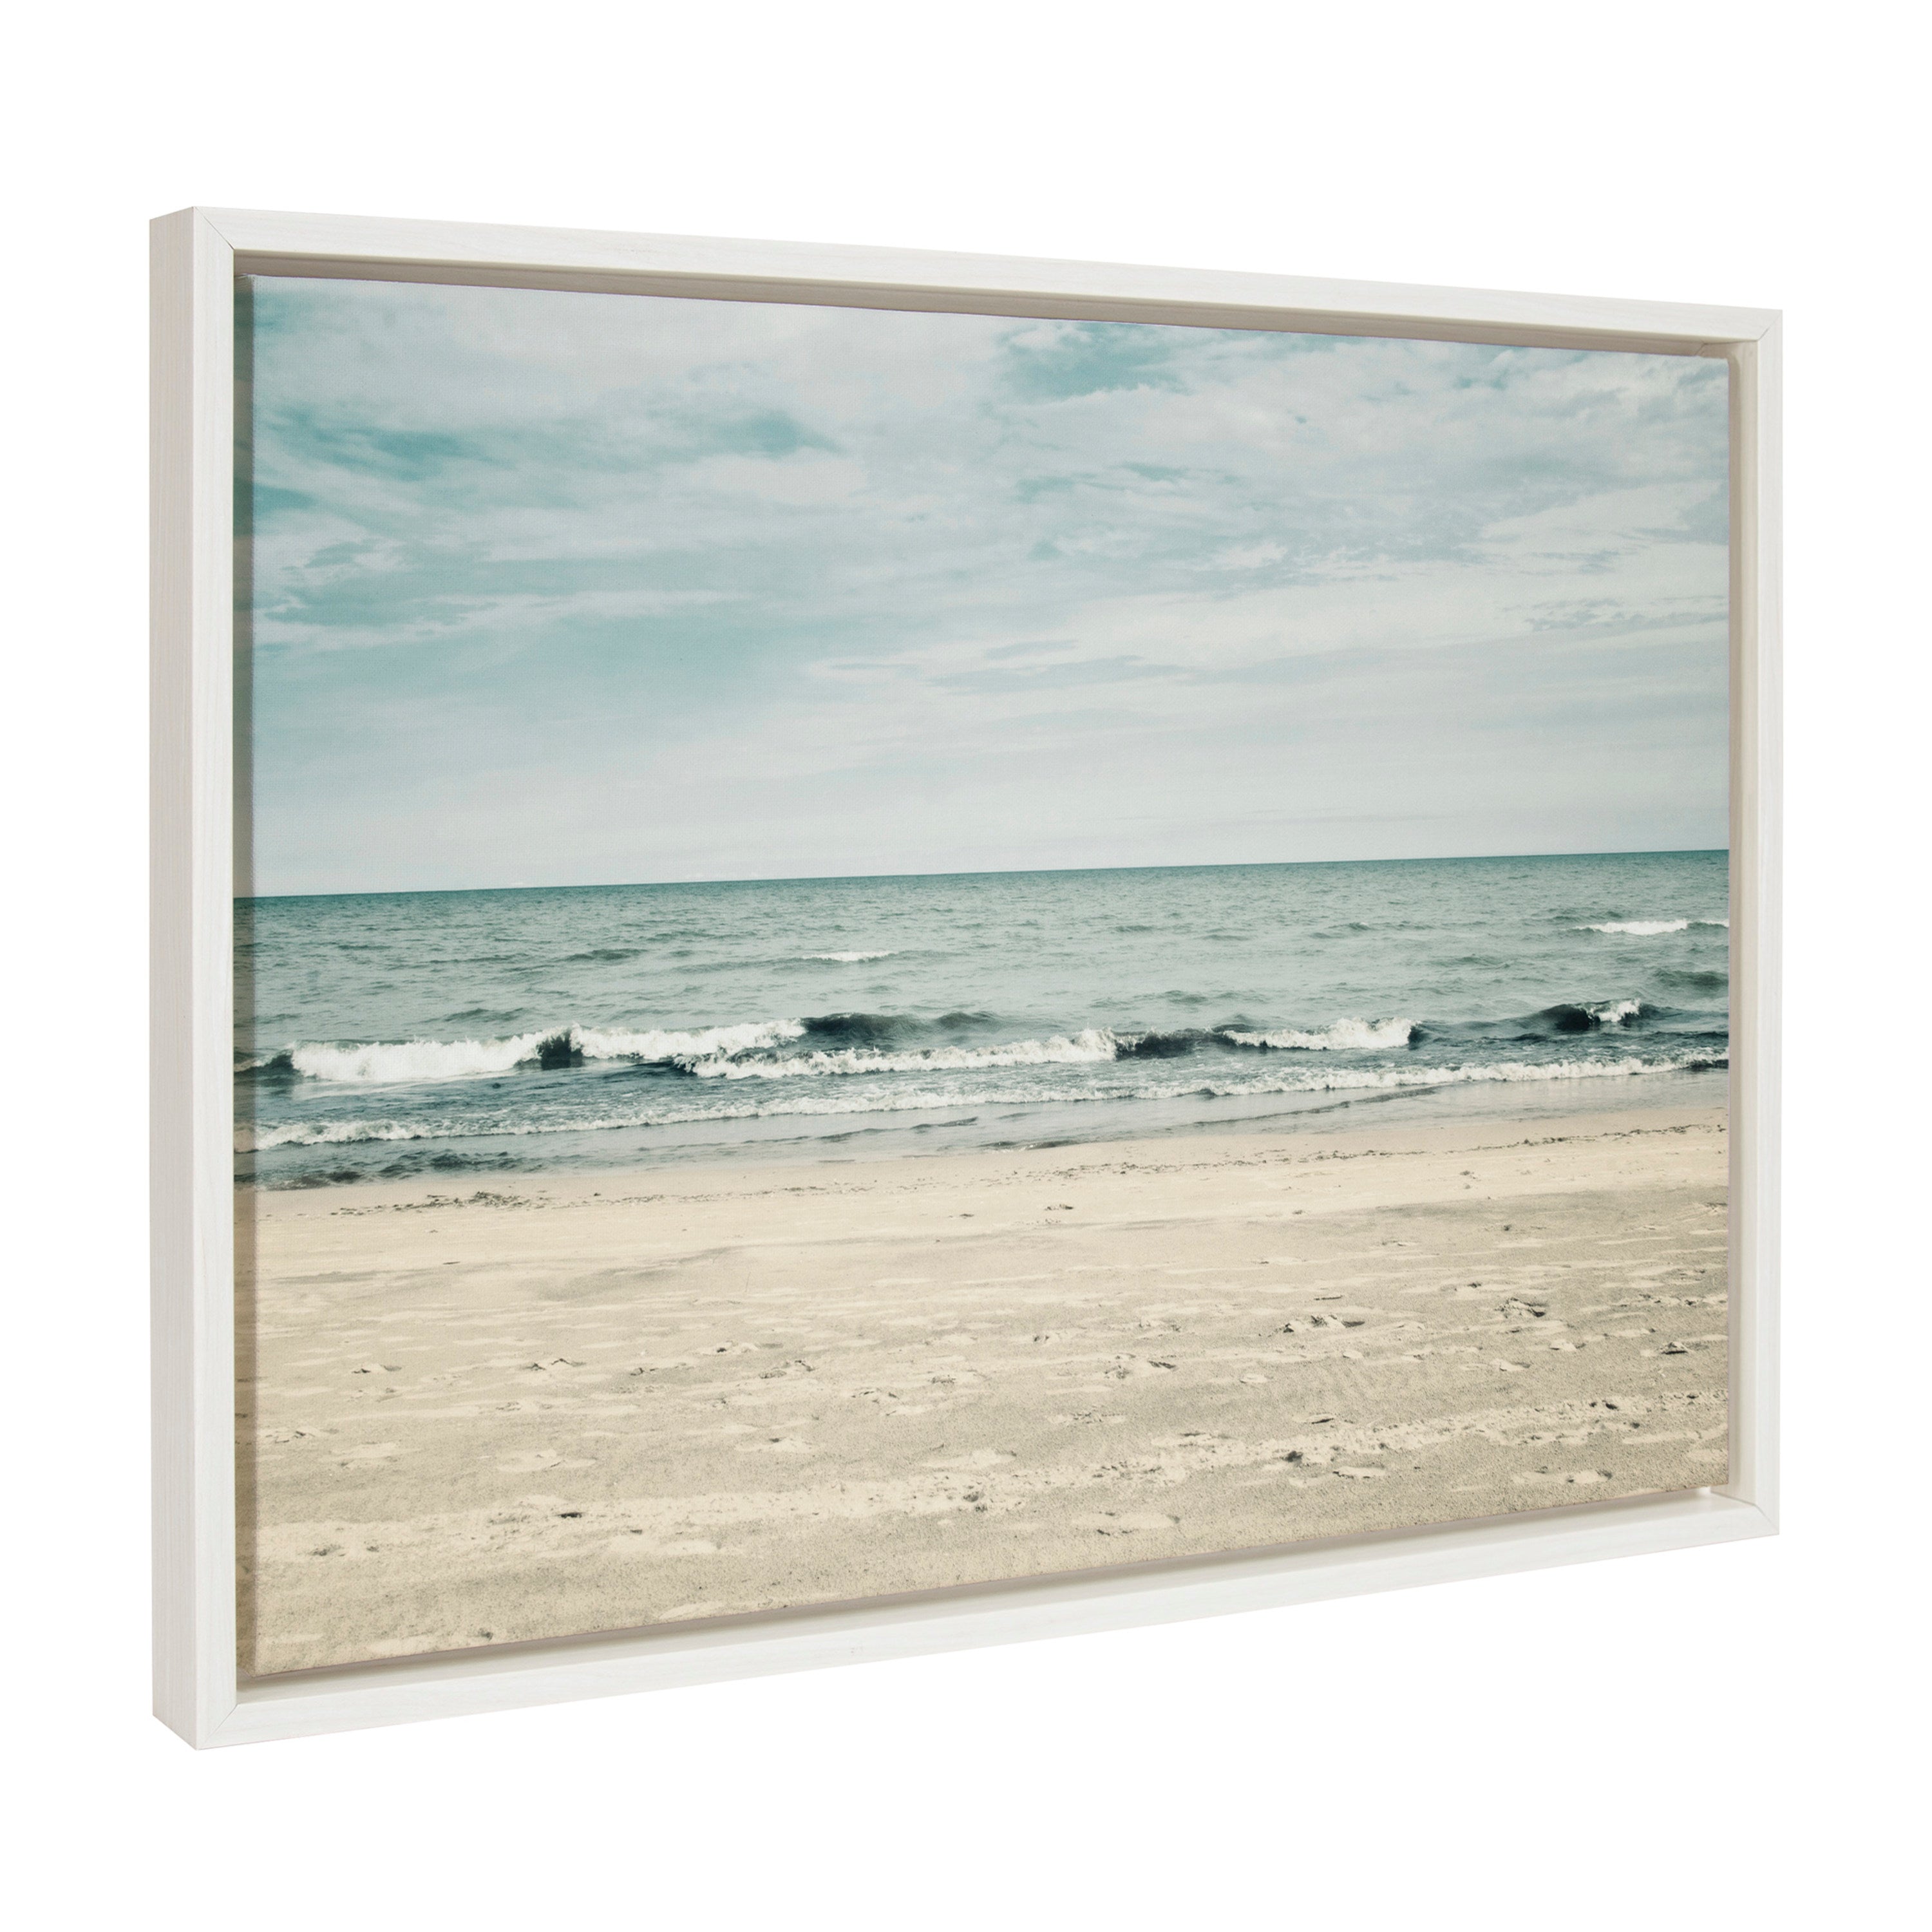 Sylvie Beach 2 Framed Canvas by Emiko and Mark Franzen of F2Images